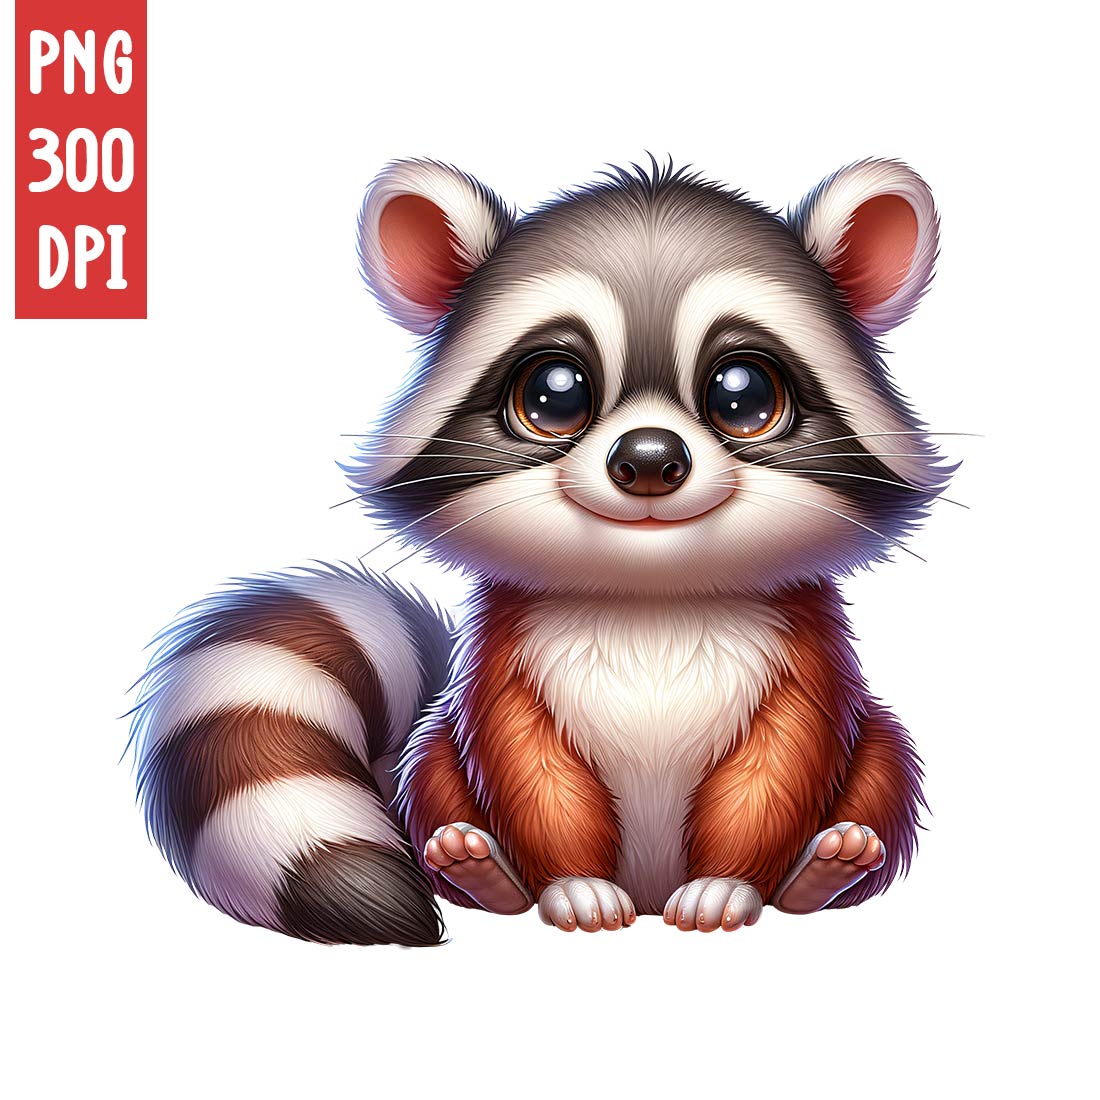 Cute Raccoon Clipart | Animals Clipart | PNG cover image.